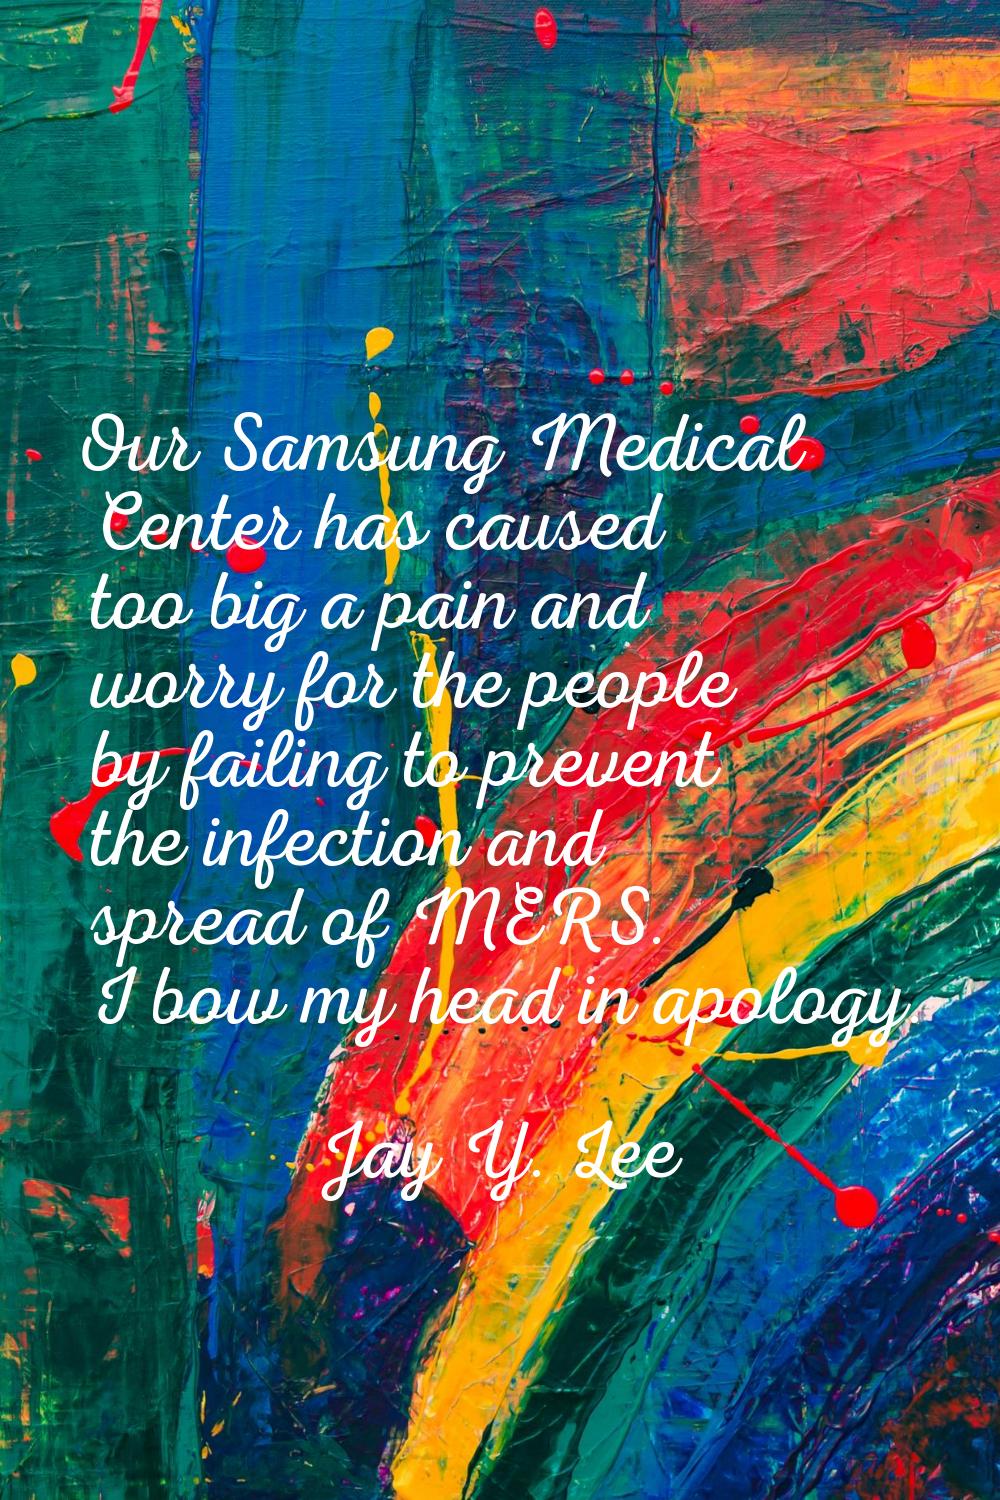 Our Samsung Medical Center has caused too big a pain and worry for the people by failing to prevent